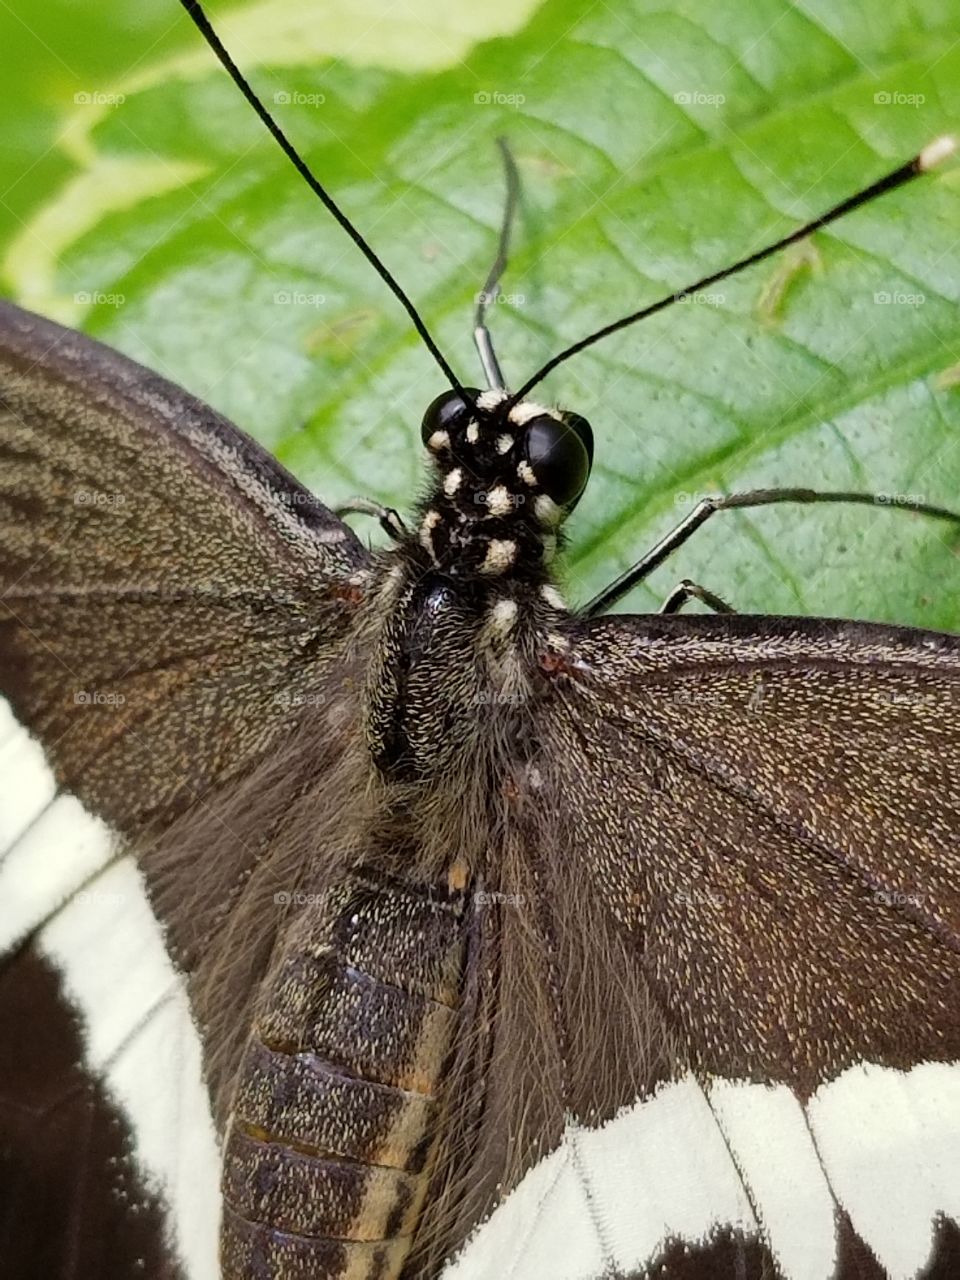 Butterfly, close up